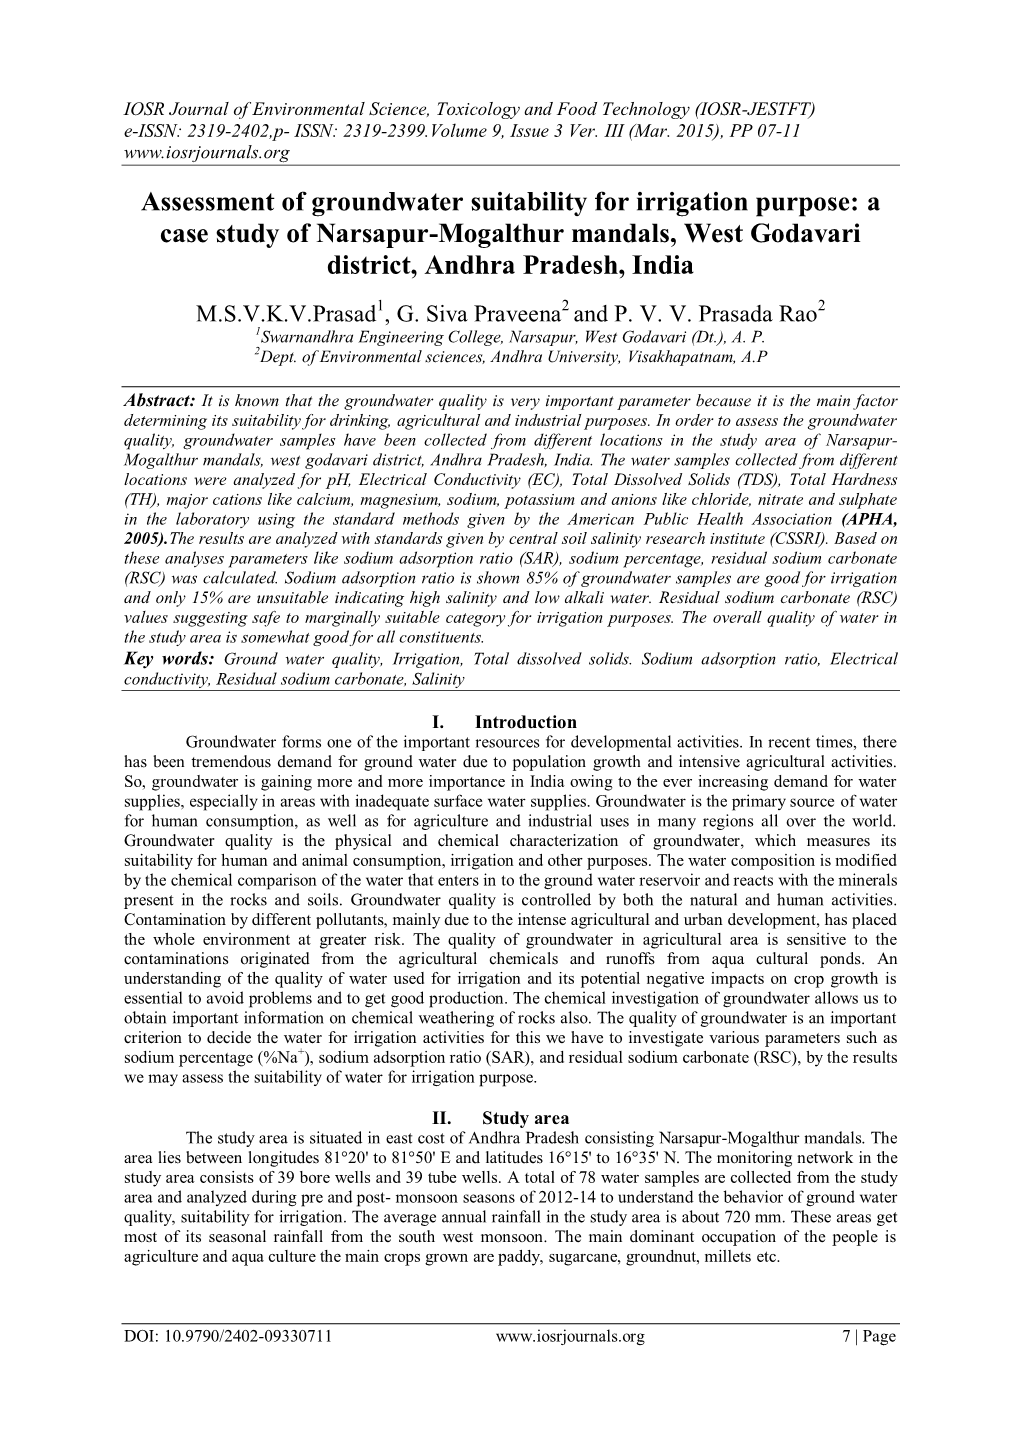 Assessment of Groundwater Suitability for Irrigation Purpose: a Case Study of Narsapur-Mogalthur Mandals, West Godavari District, Andhra Pradesh, India